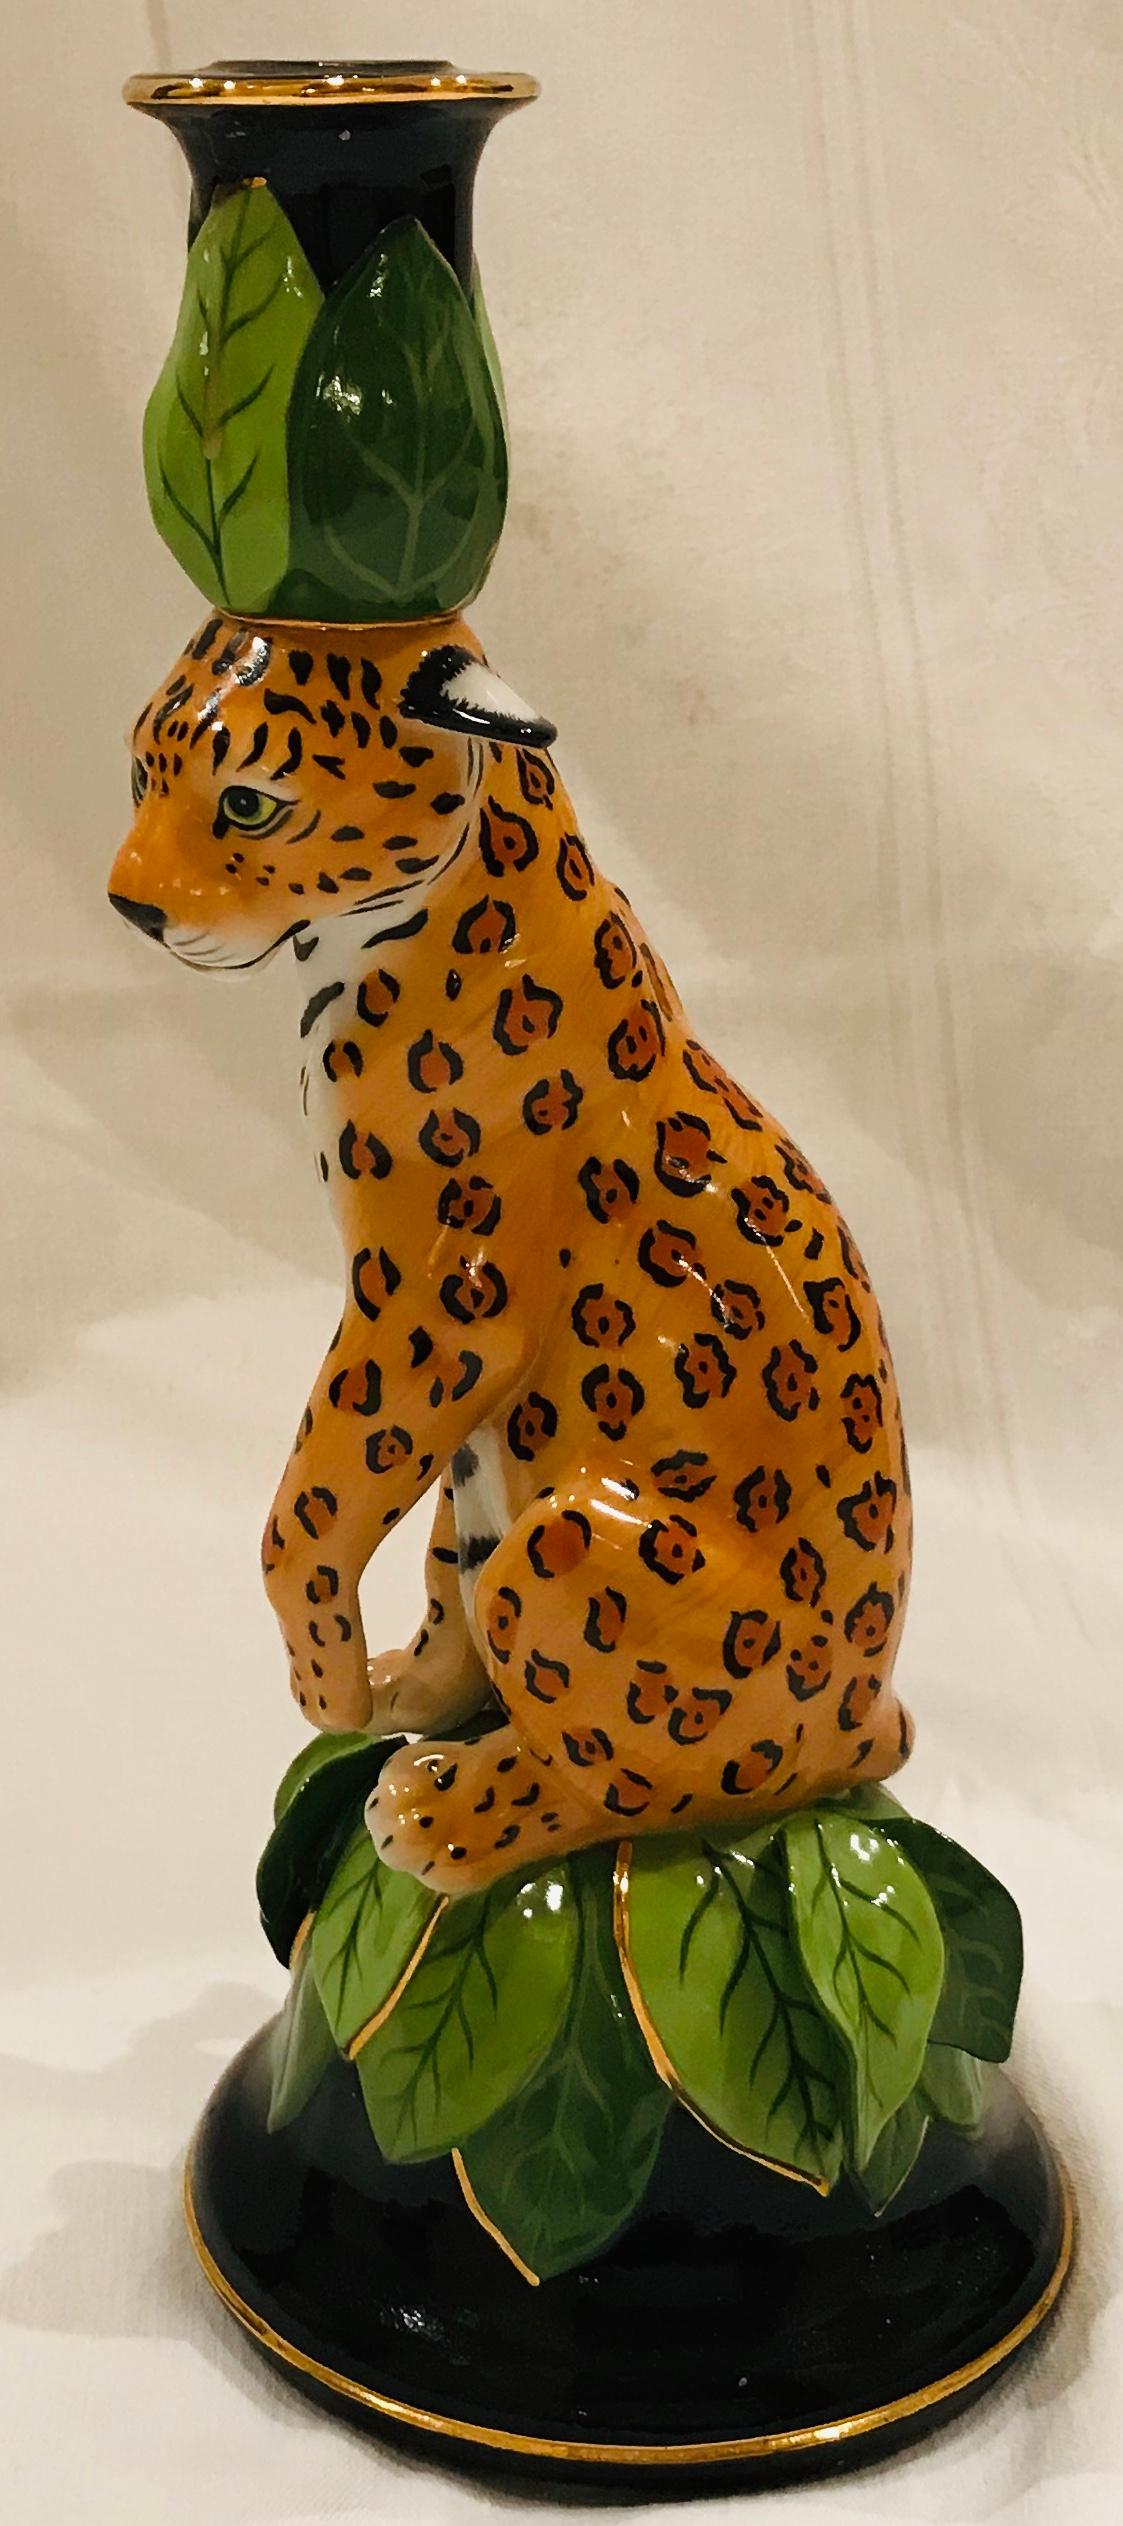 Jaguar jungle, a colorful ceramic candleholder-sculpture of a fanciful seated Jaguar, paw raised as if about to clean his face, wearing a leaf headpiece (that holds the candle), is a Classic whimsical piece by the artist Lynn Chase. 24-karat gold